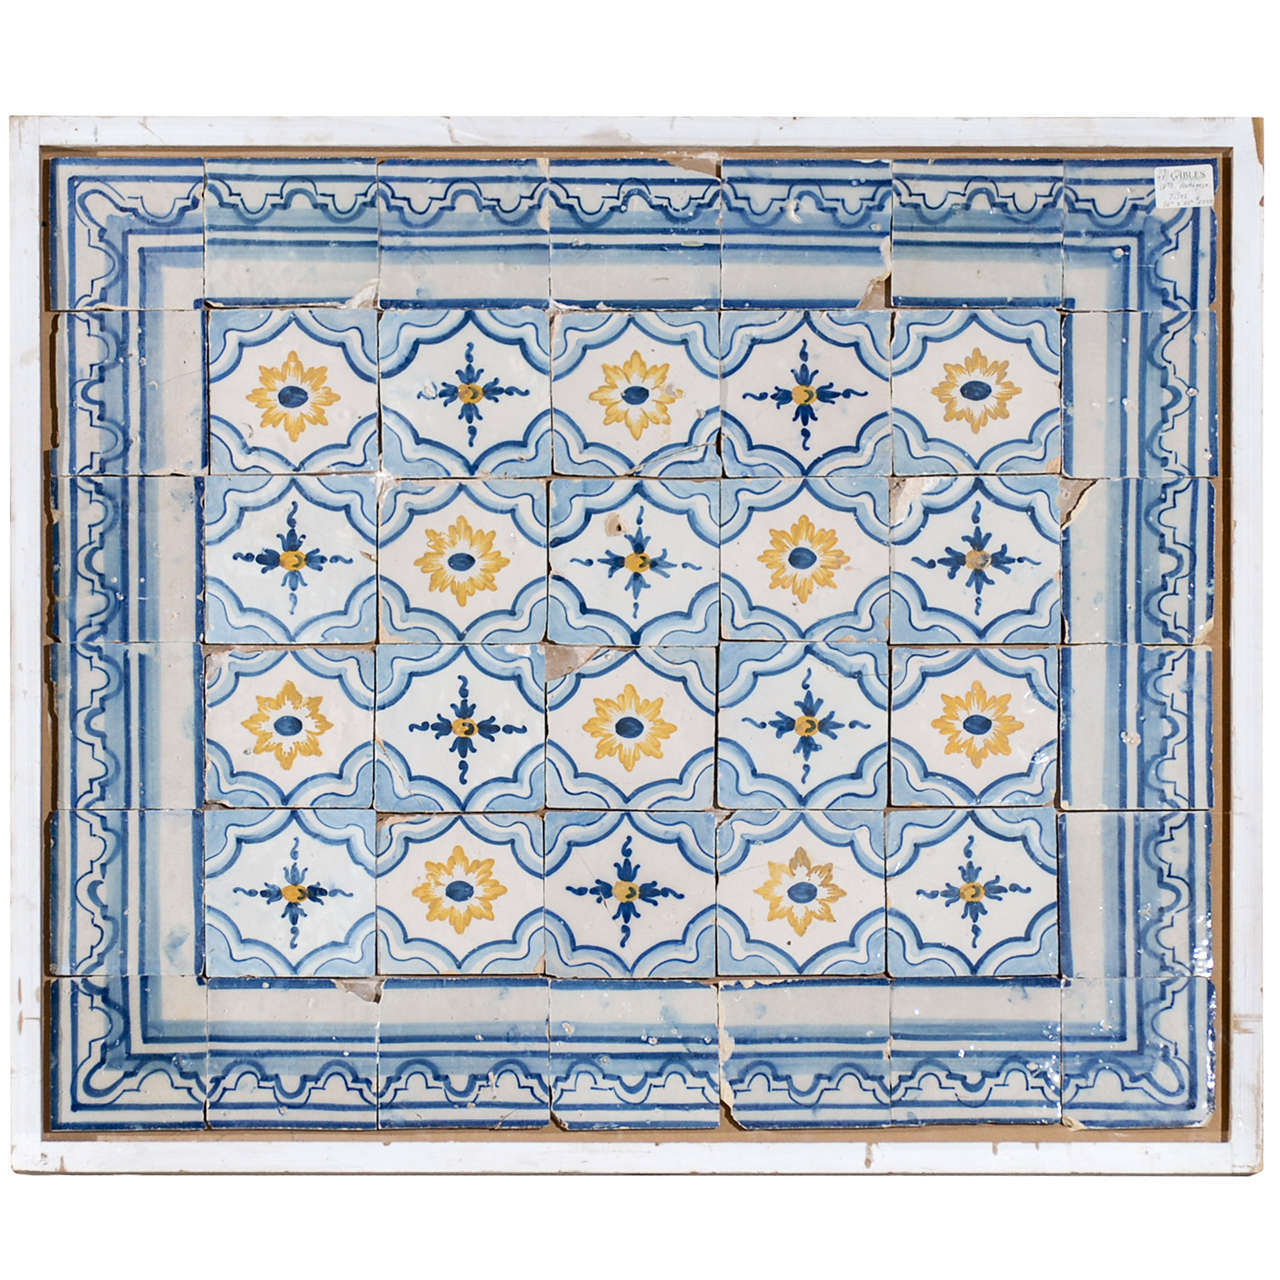 18th Century Portugese Tiles in Blue and Yellow, Circa 1780